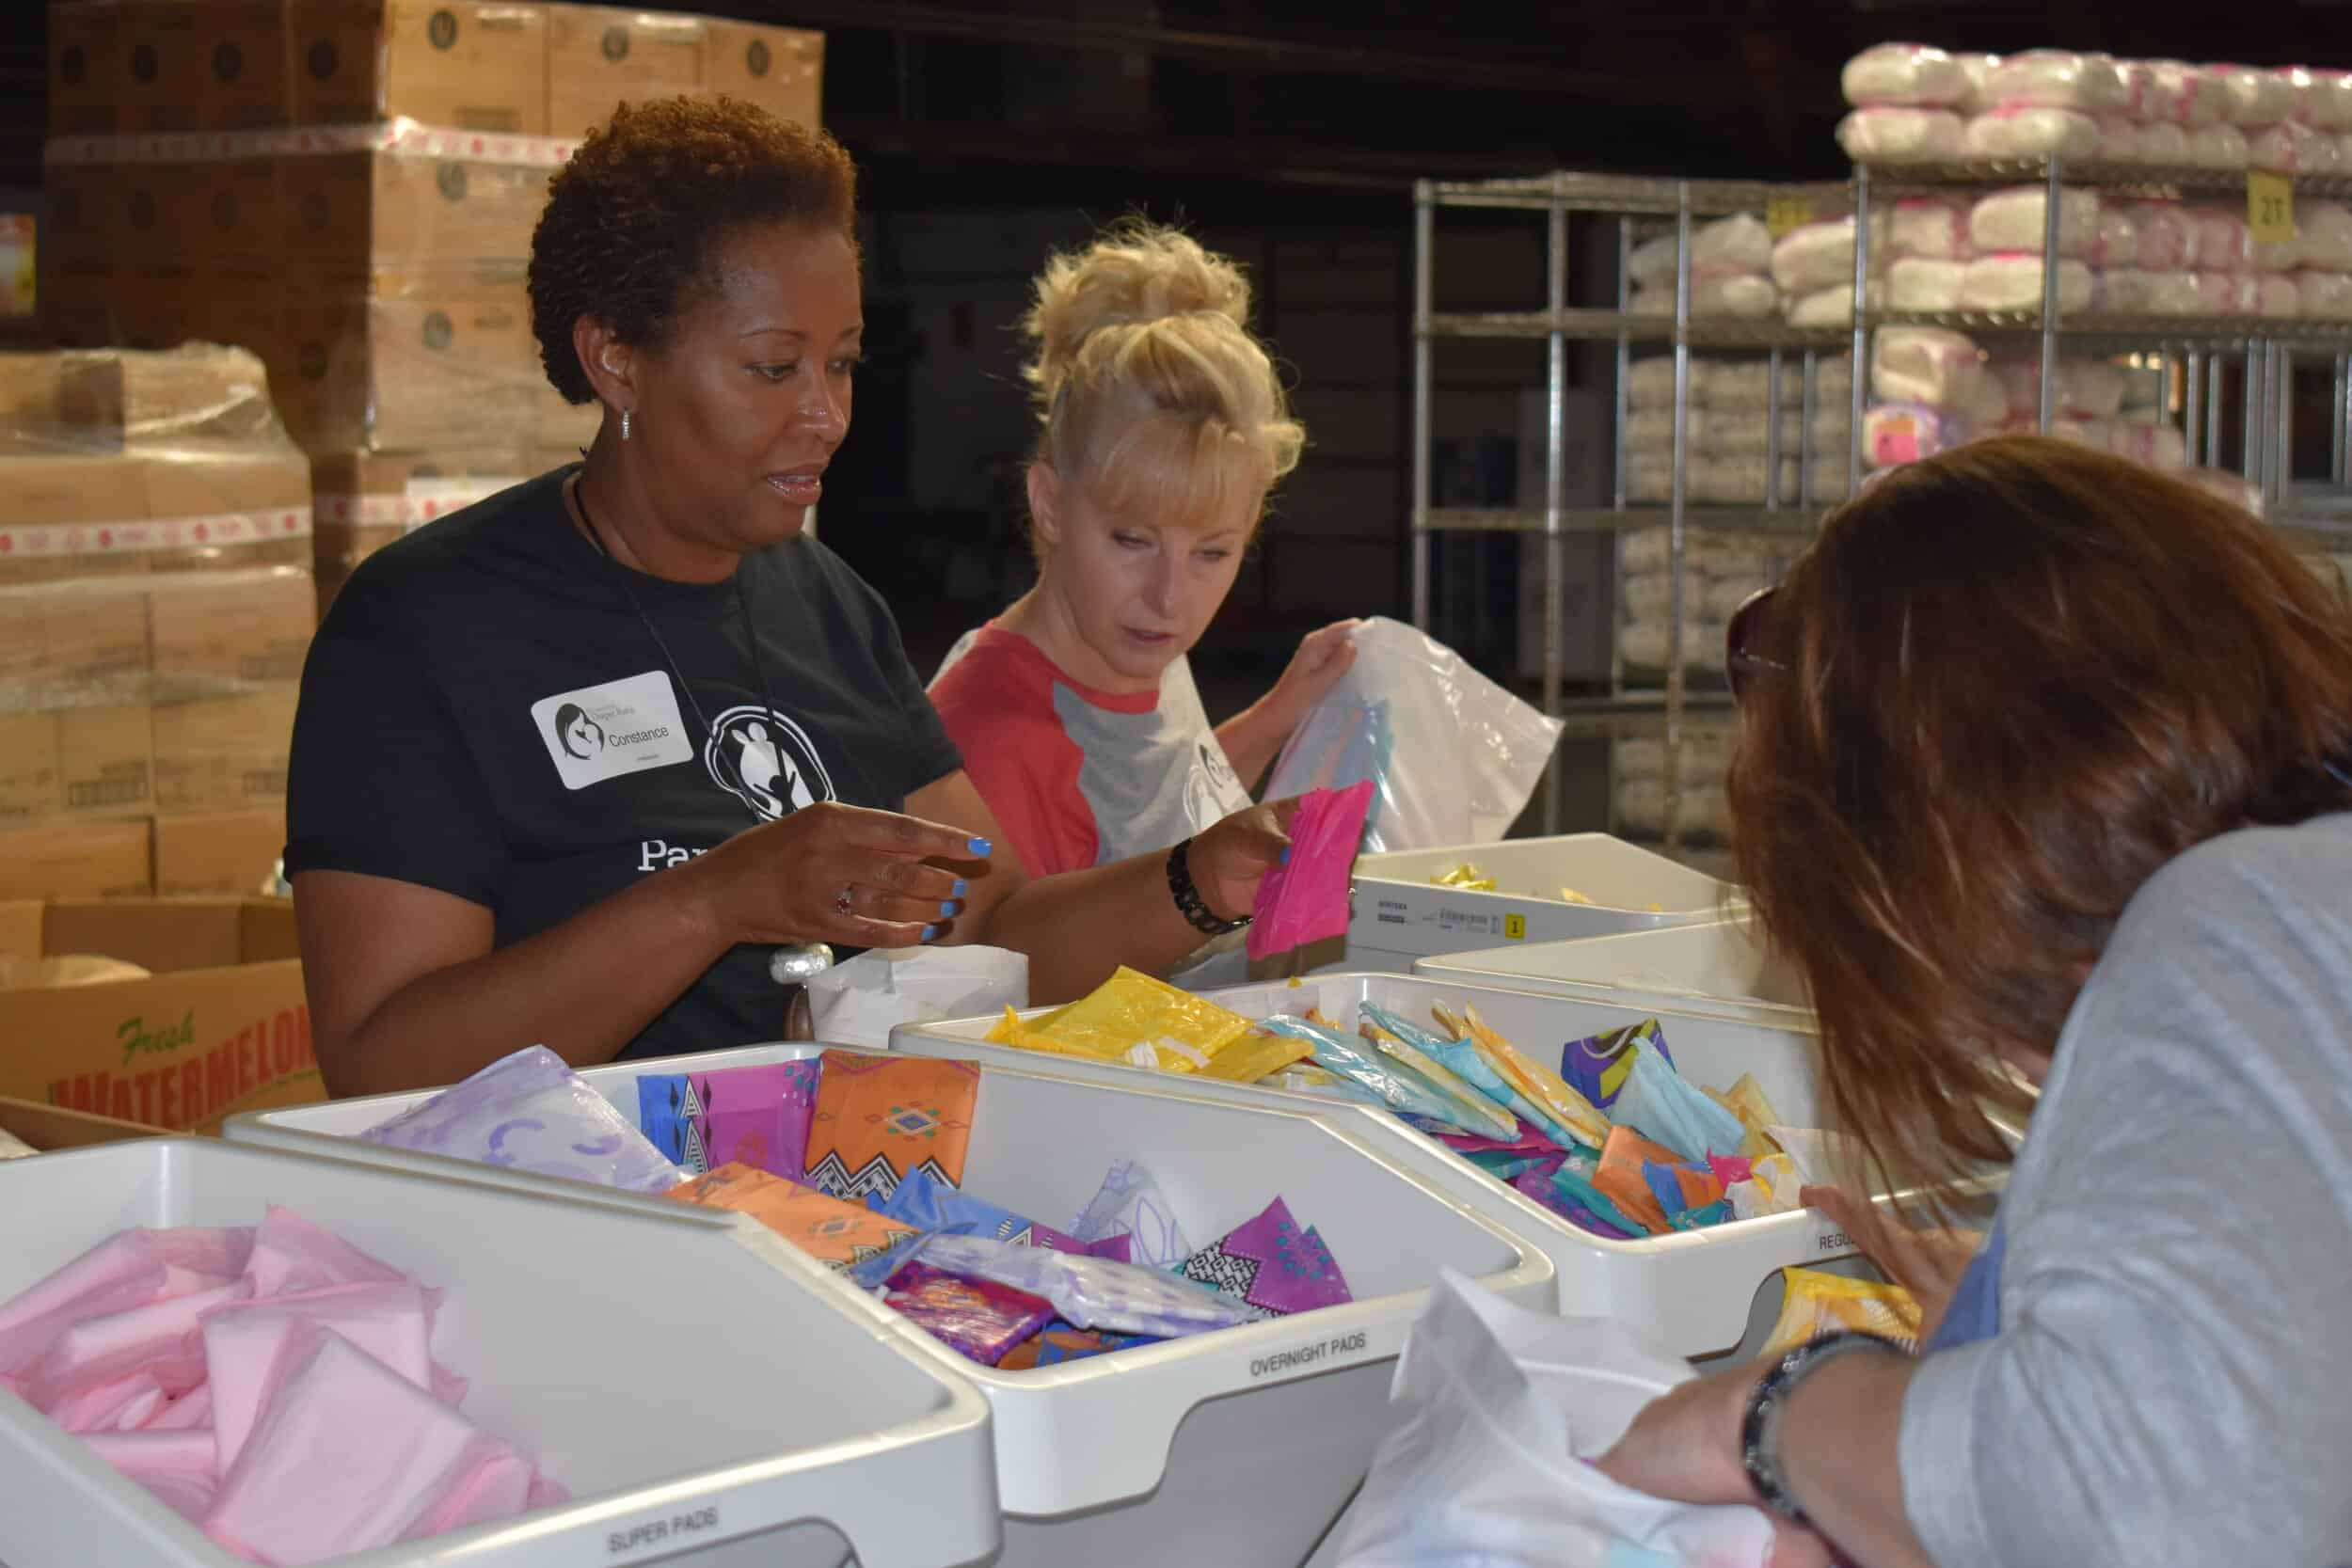 At left: Parents as Teachers President/CEO Constance Gully and Donna O’Brien VP, professional and program development, and Kerry Caverly, PAT senior VP, chief program officer, prepare feminine hygiene product kits for distribution to area low-income…